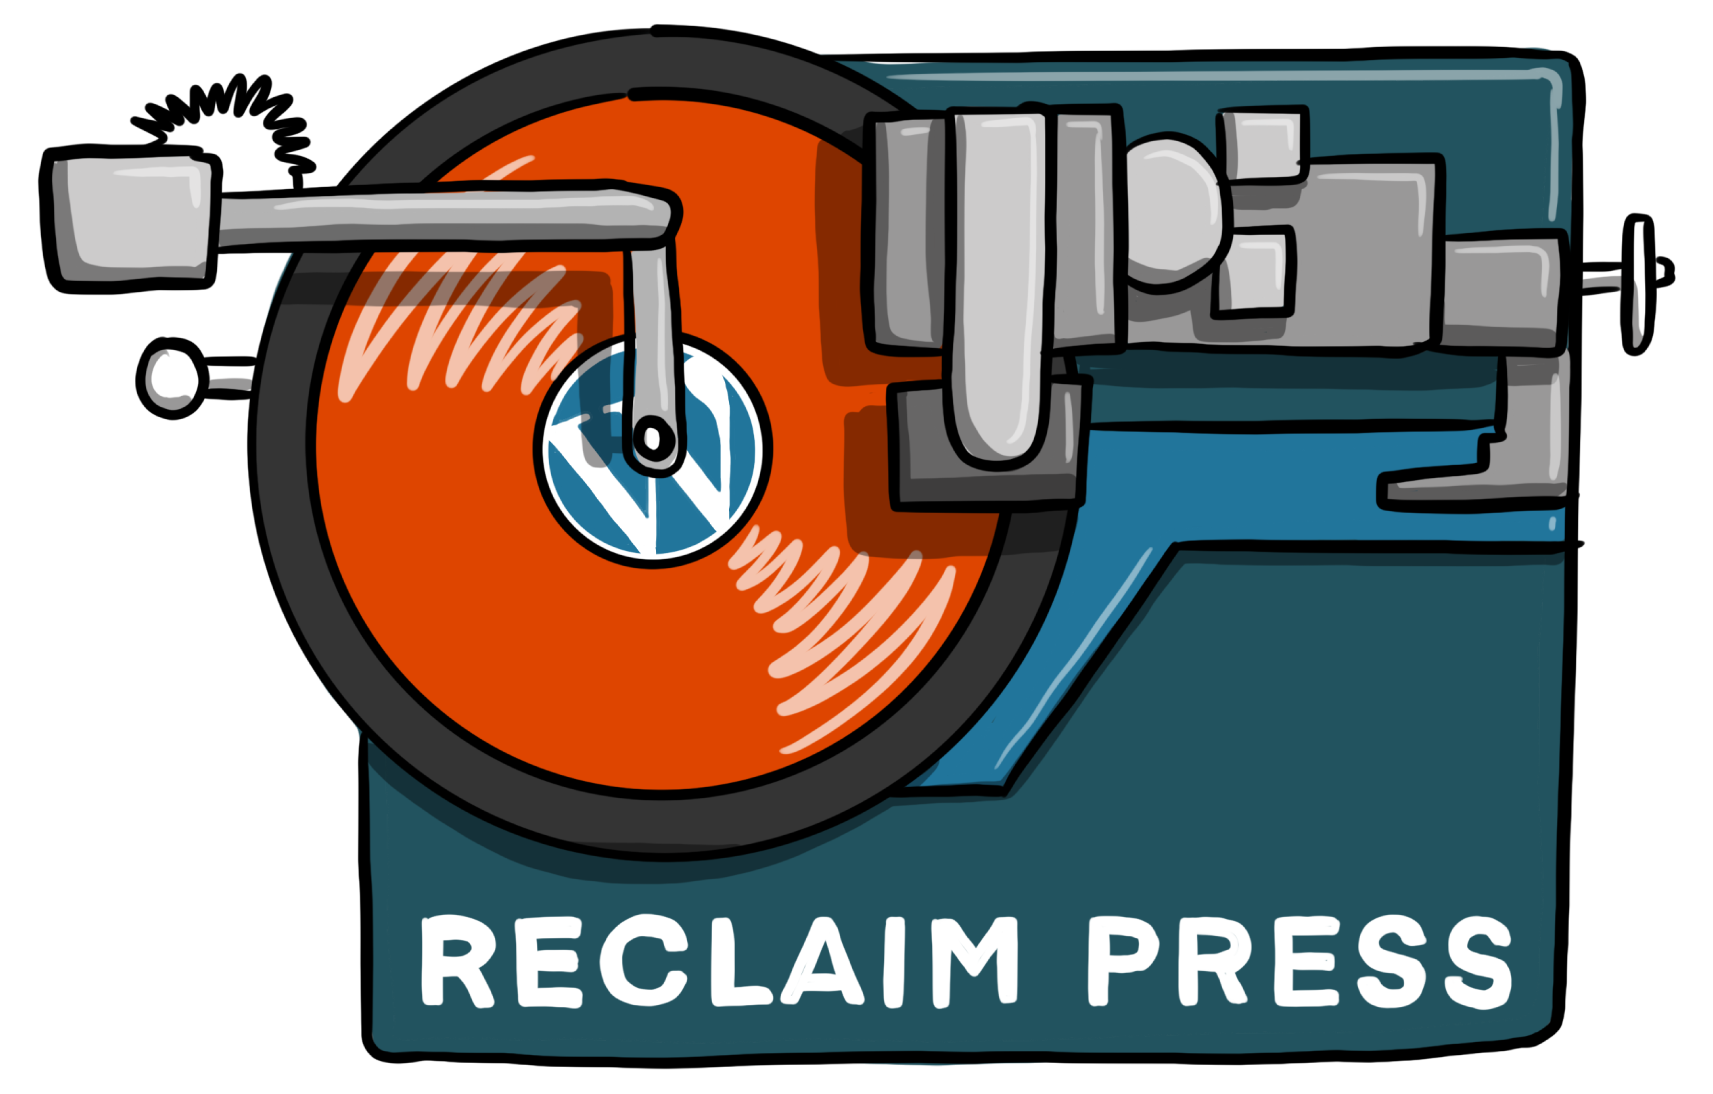 From passion project to web empire.. talking ReclaimPress with Bryan Mathers